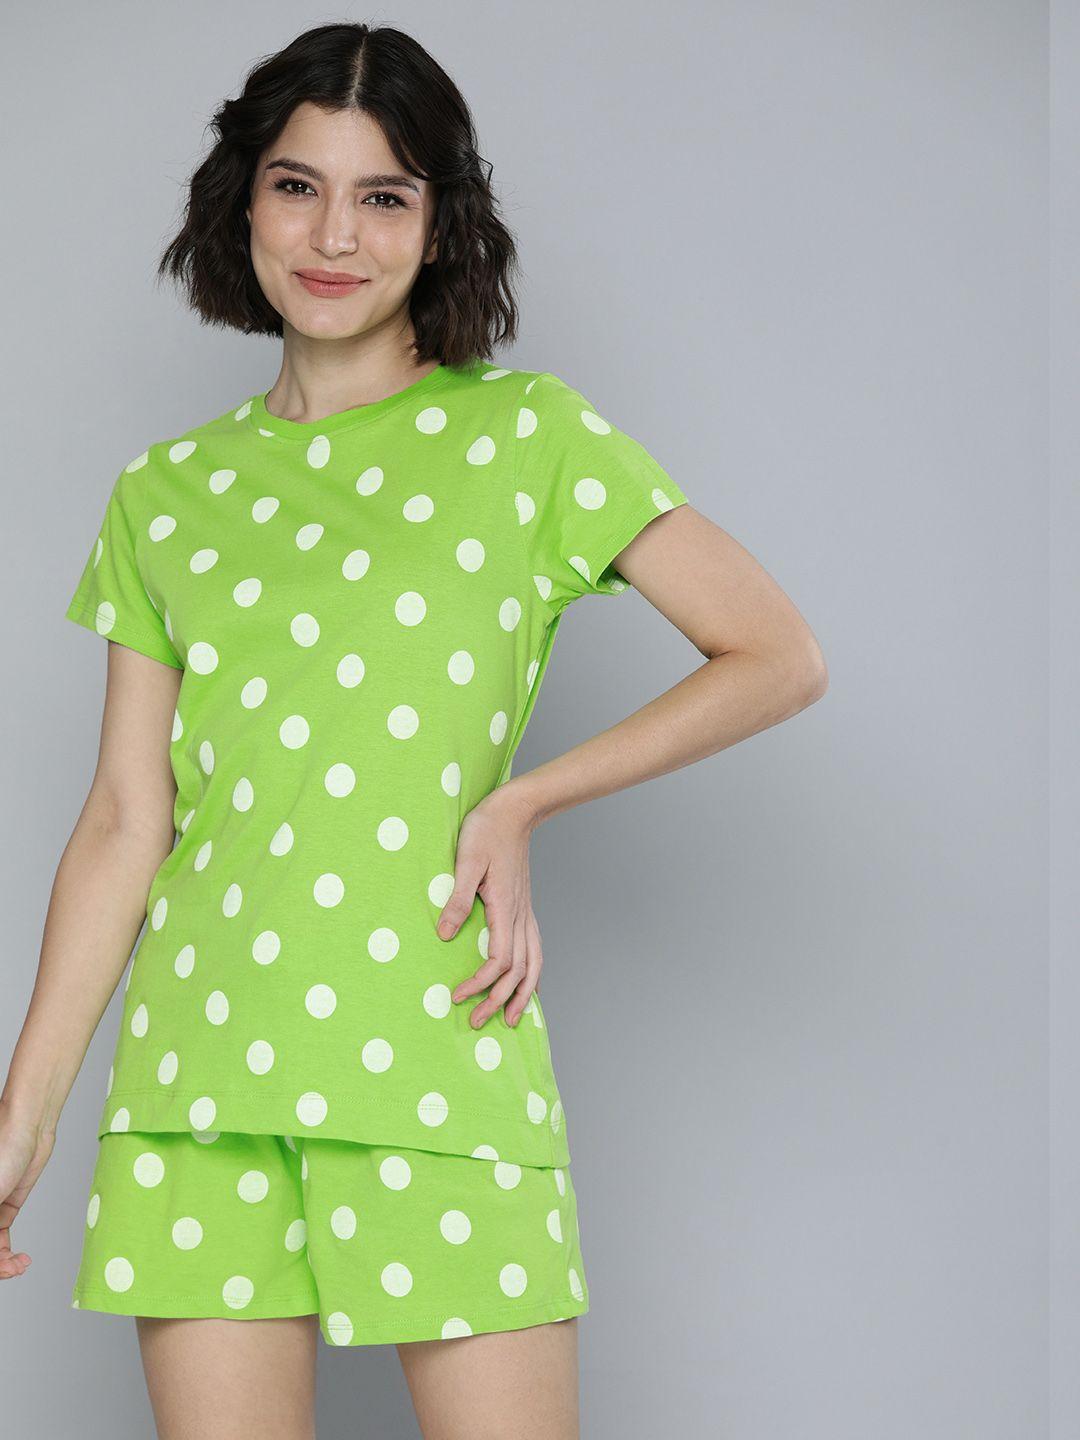 here&now women green & white polka dot printed casual night suit